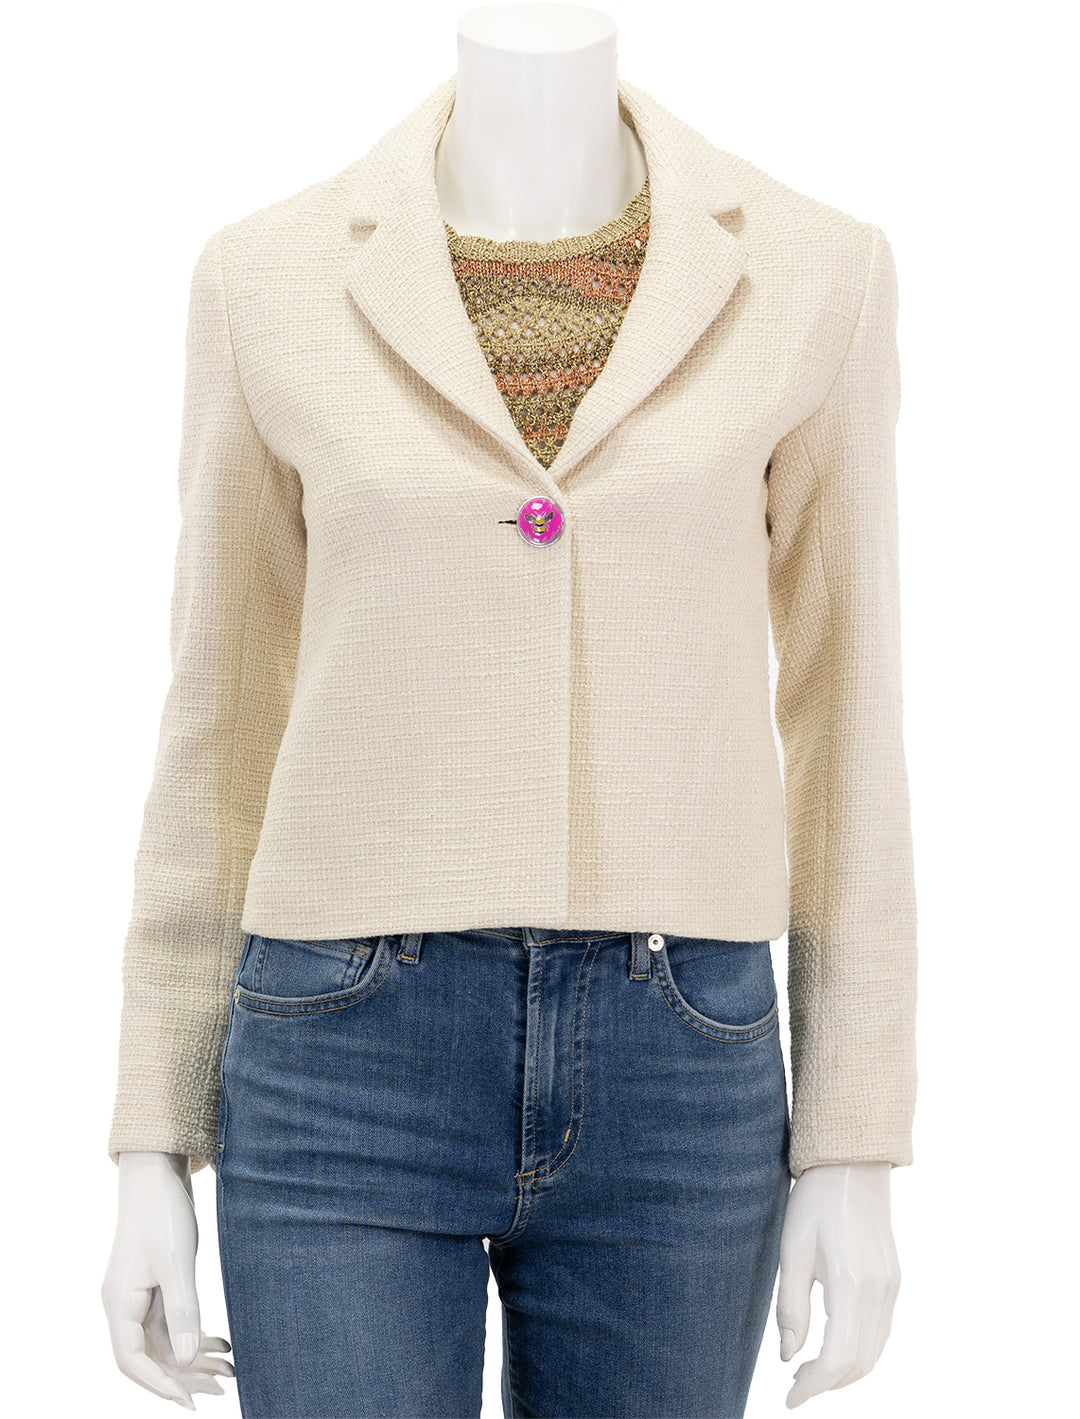 Front view of Vilagallo's imma jacket in ivory, buttoned.